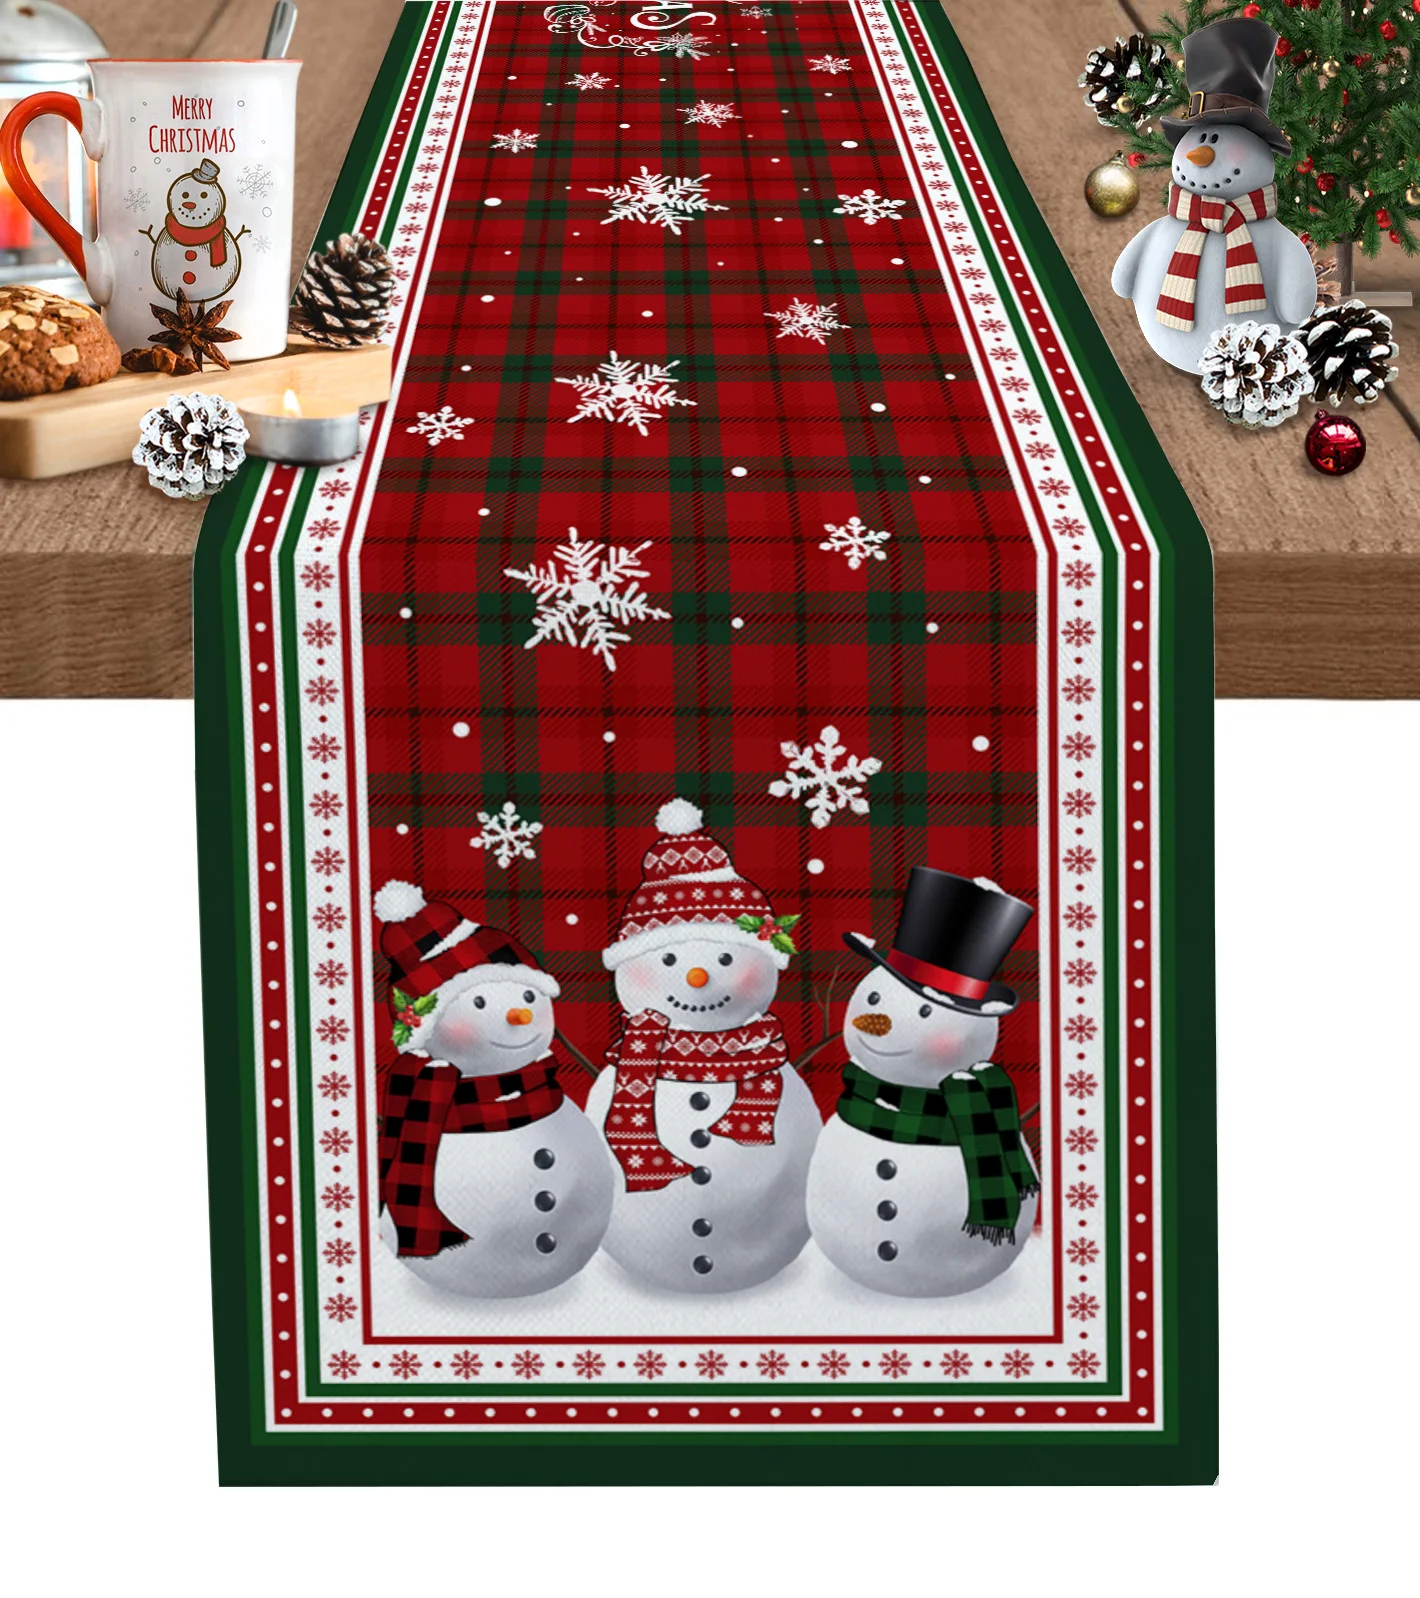 

Snowman Christmas Snowflake Red Green Plaid Table Runner Wedding Party Dining Table Cover Placemat Napkin Home Kitchen Decor